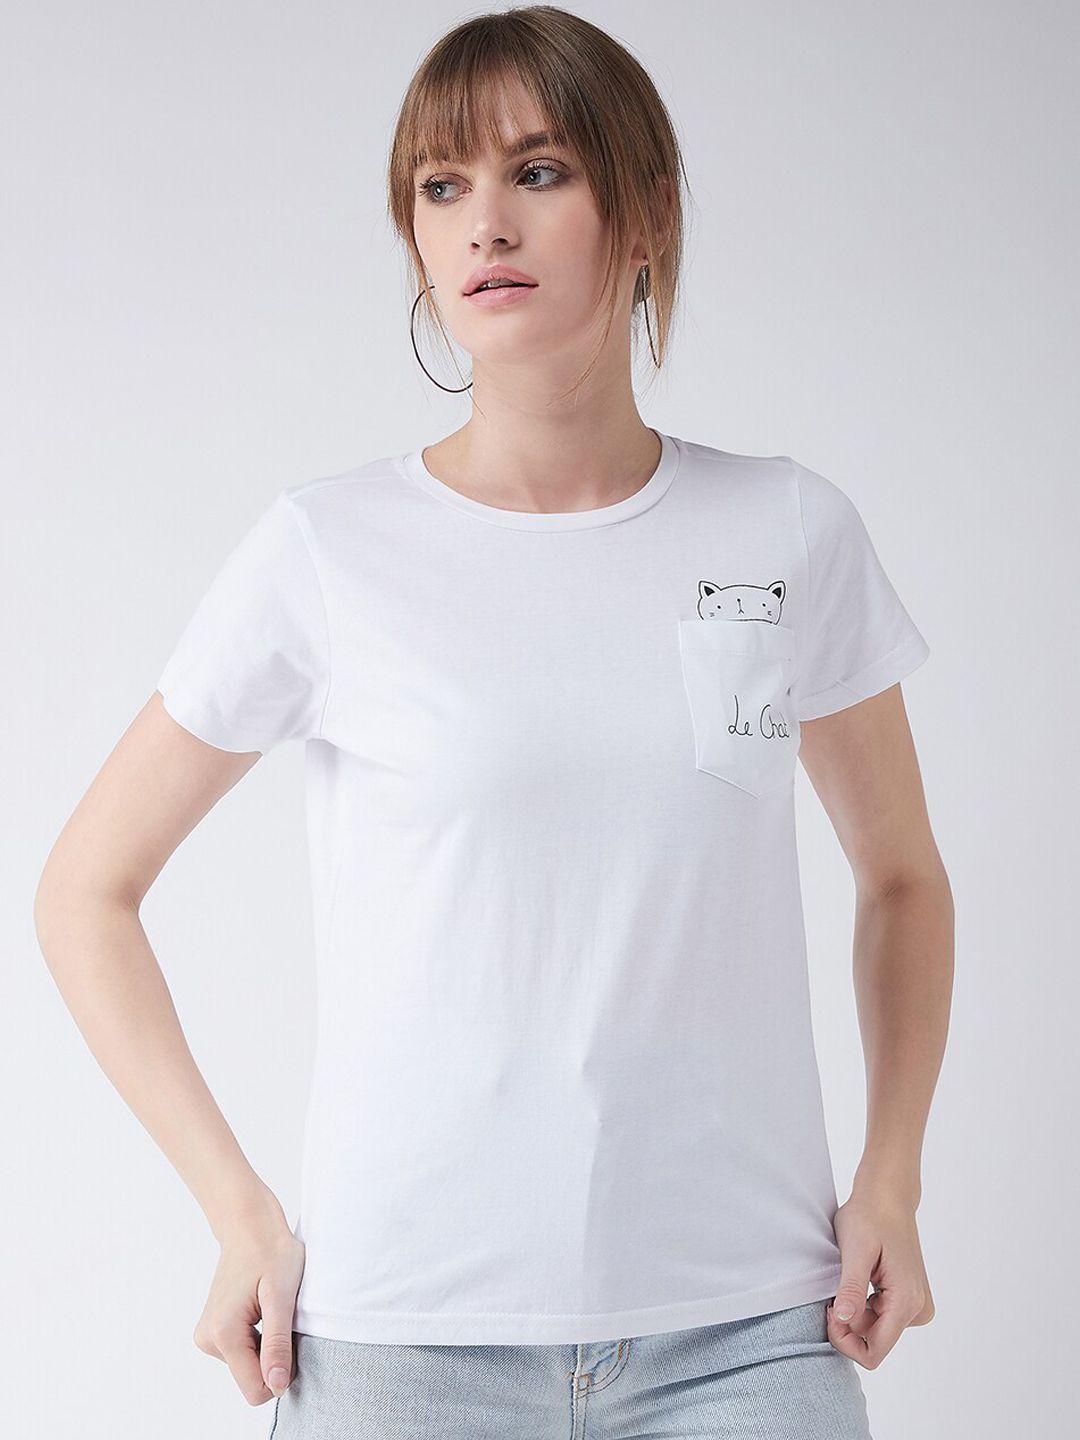 miss-chase-women-white-solid-round-neck-t-shirt